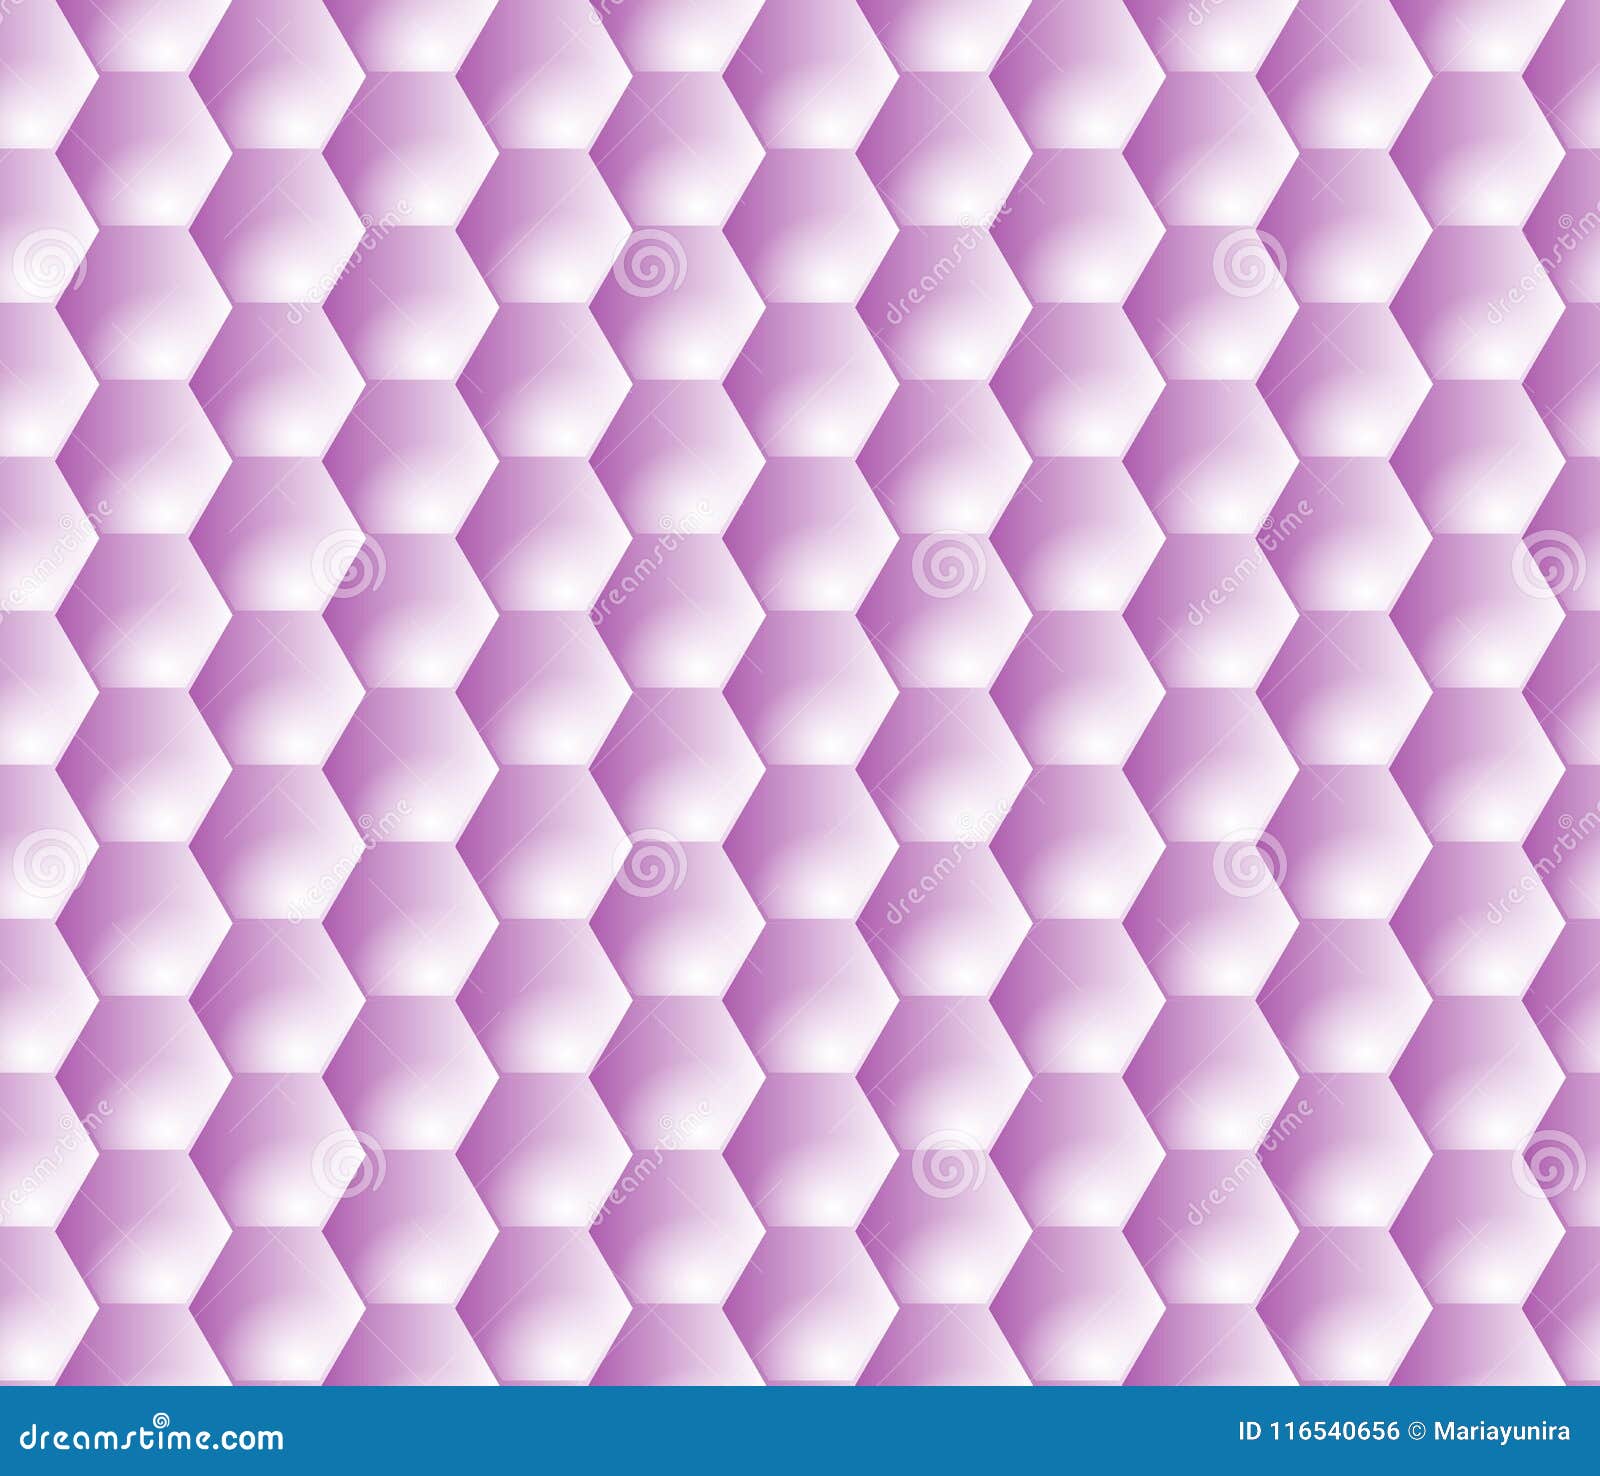 Download Hexagon Grid Pattern Seamless Vector Background Svg Stock Photo Illustration Of Grid Honey 116540656